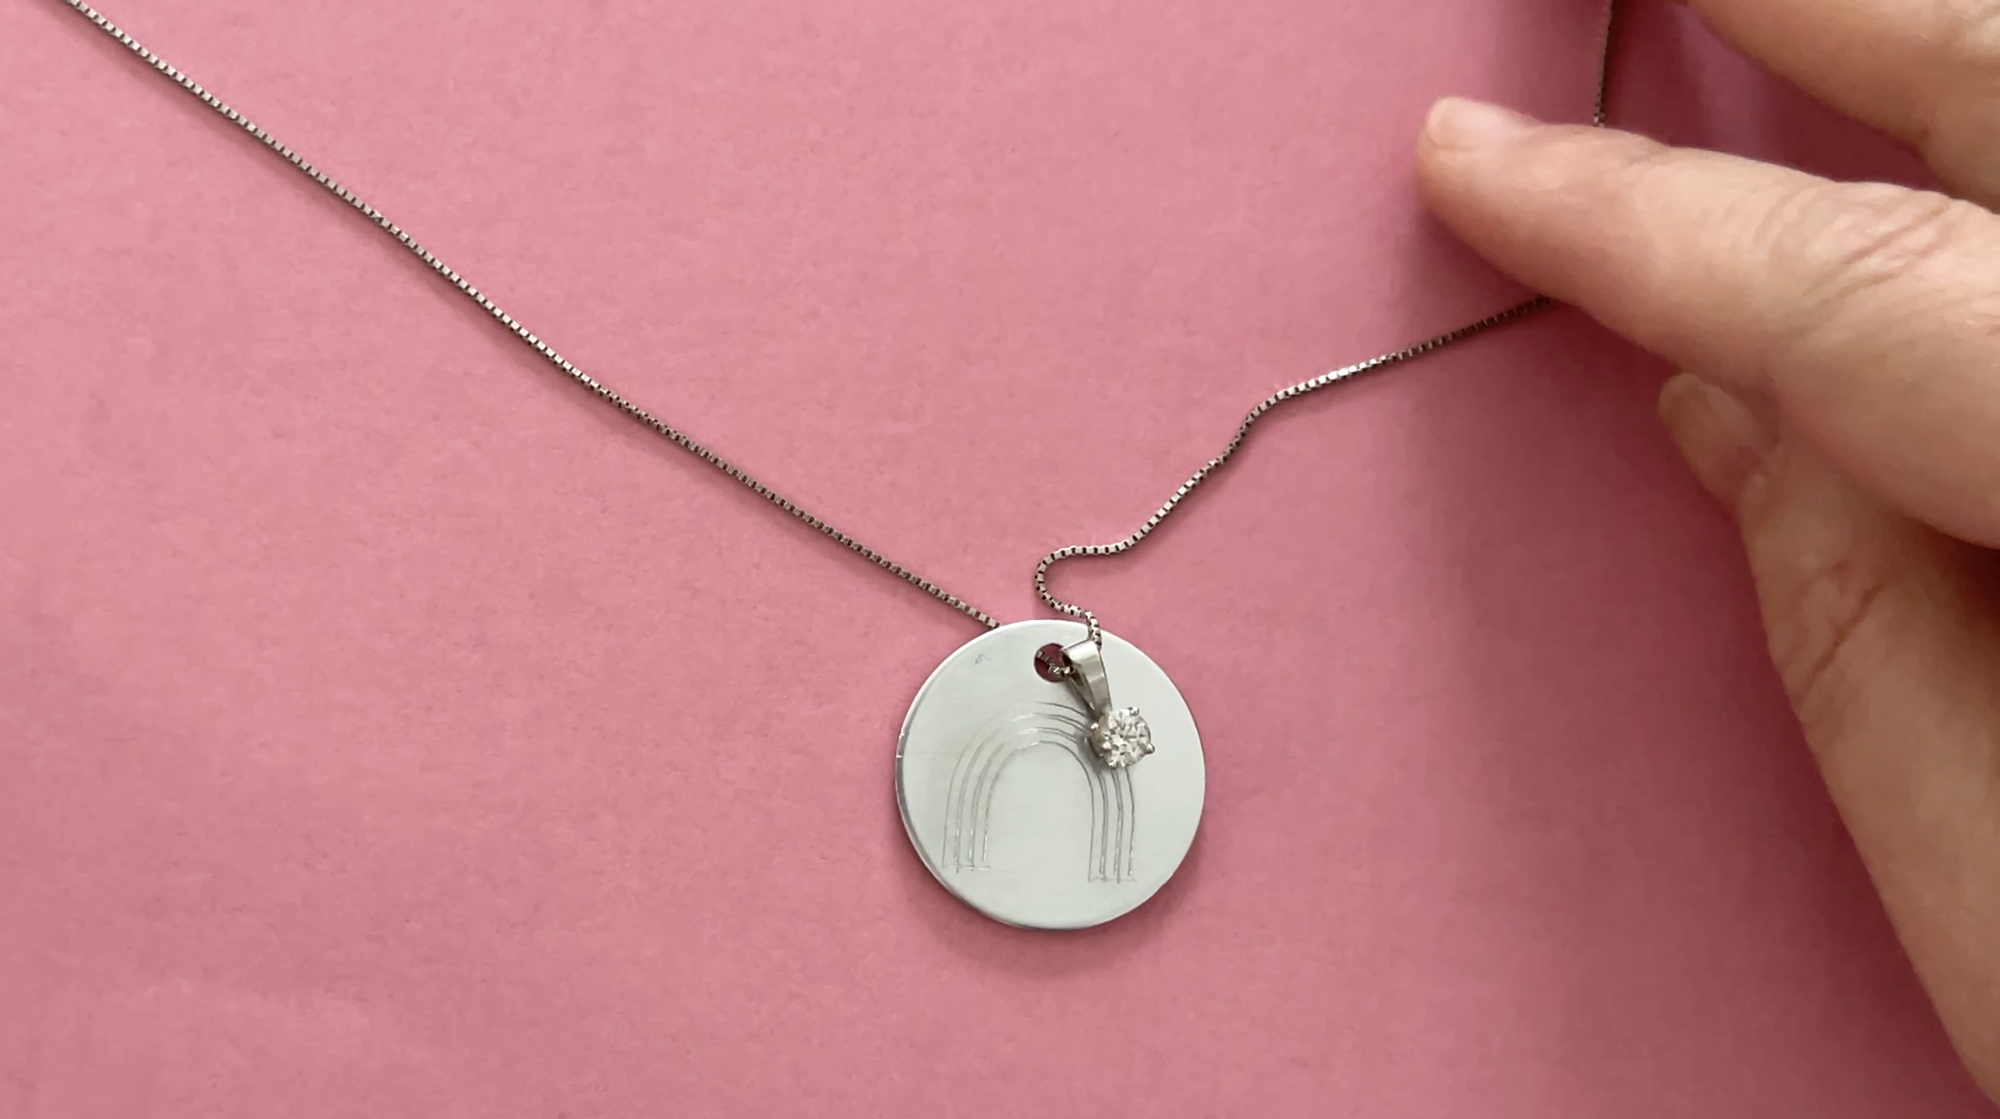 How To Engrave Jewelry With The Cricut Engraving Tool